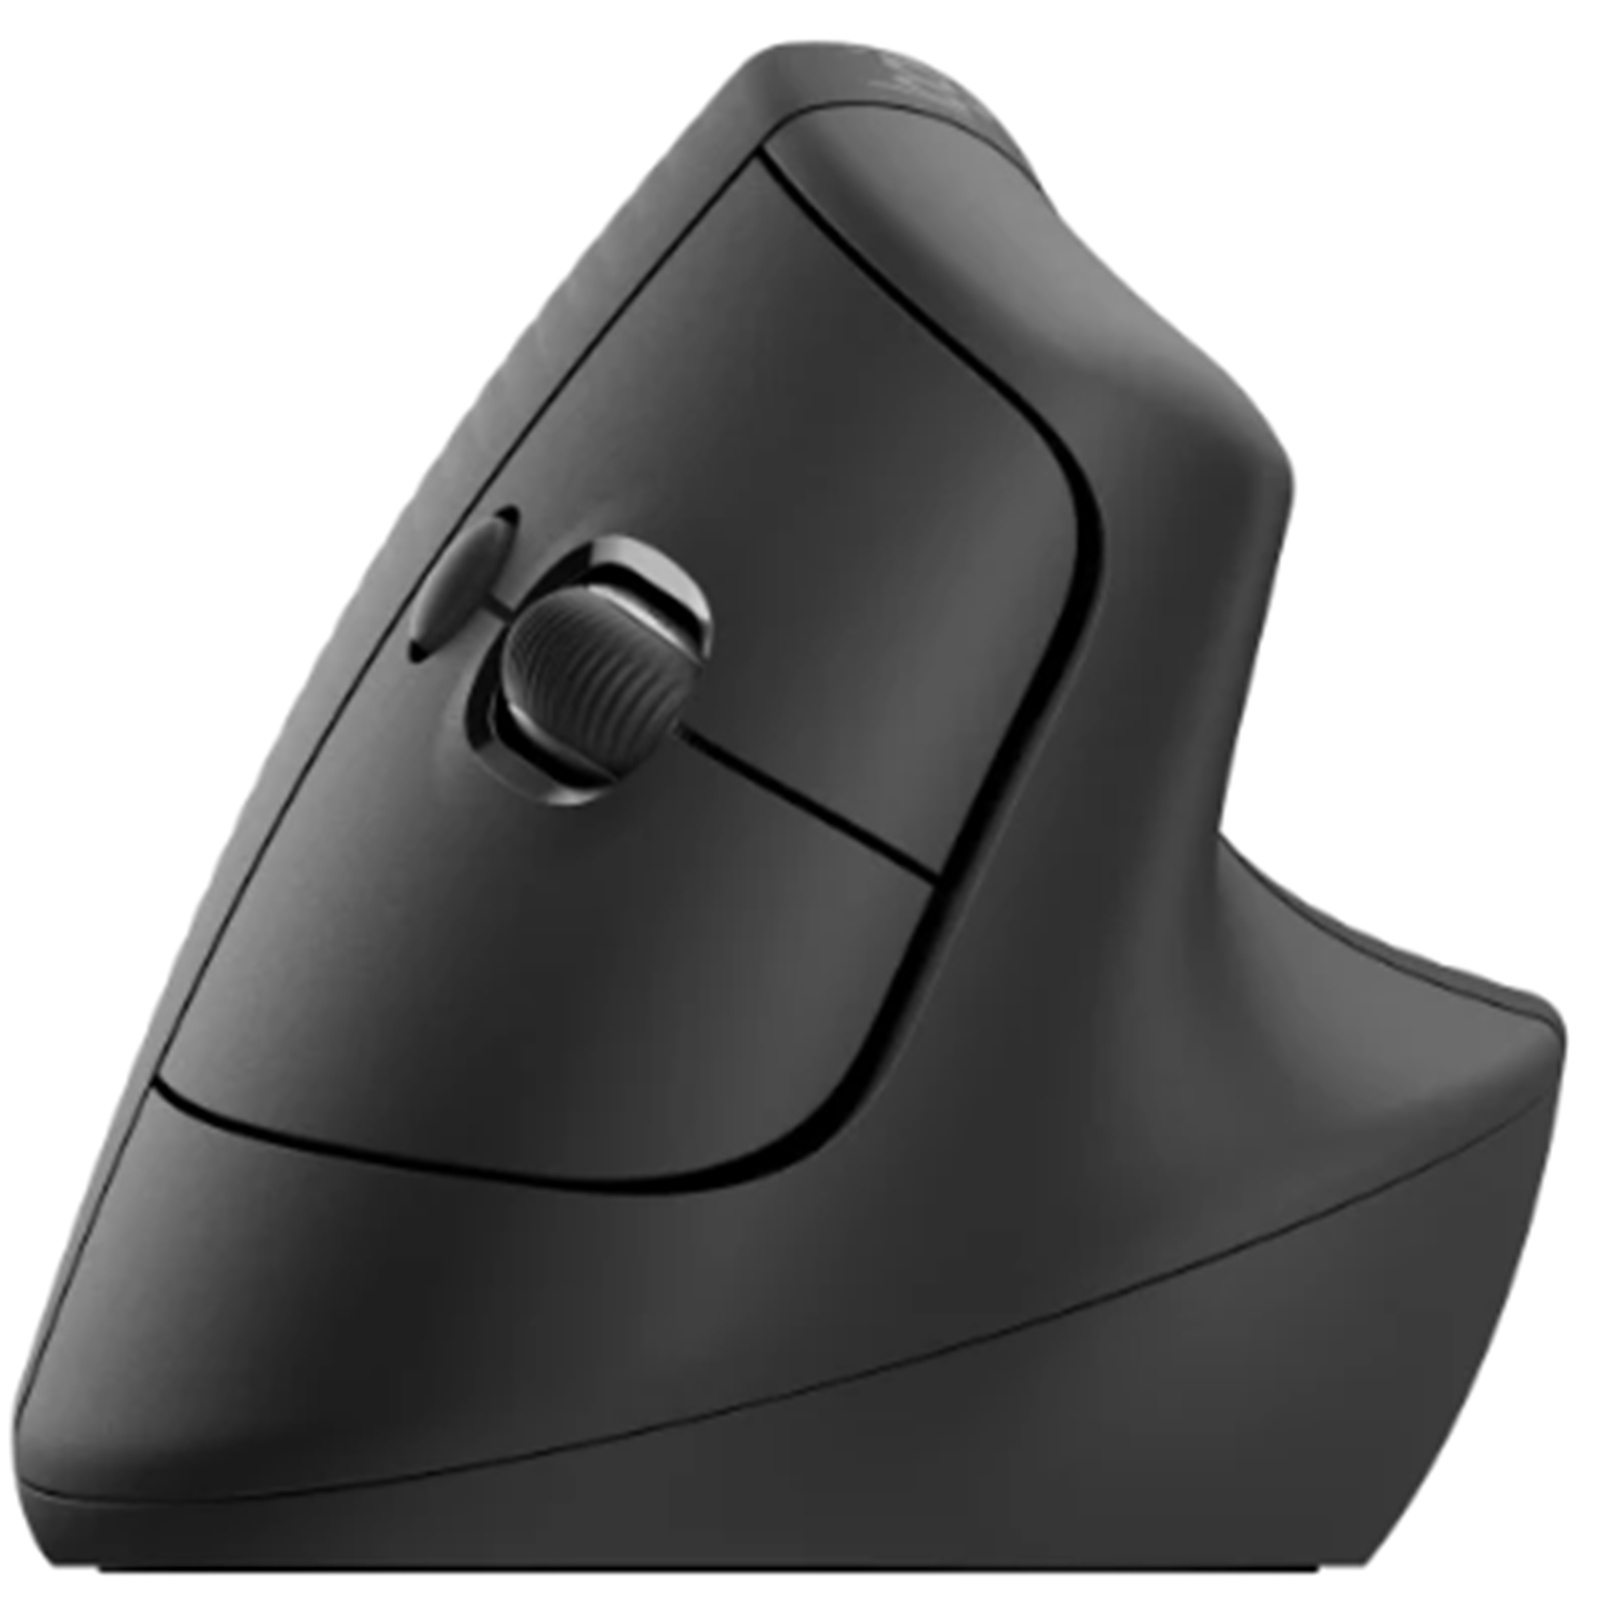 Contour Design Unimouse Mouse Wireless - Wireless Ergonomic Mouse for  Laptop and Desktop Computer Use - 2.4GHz Fully Adjustable Mouse - Mac & PC